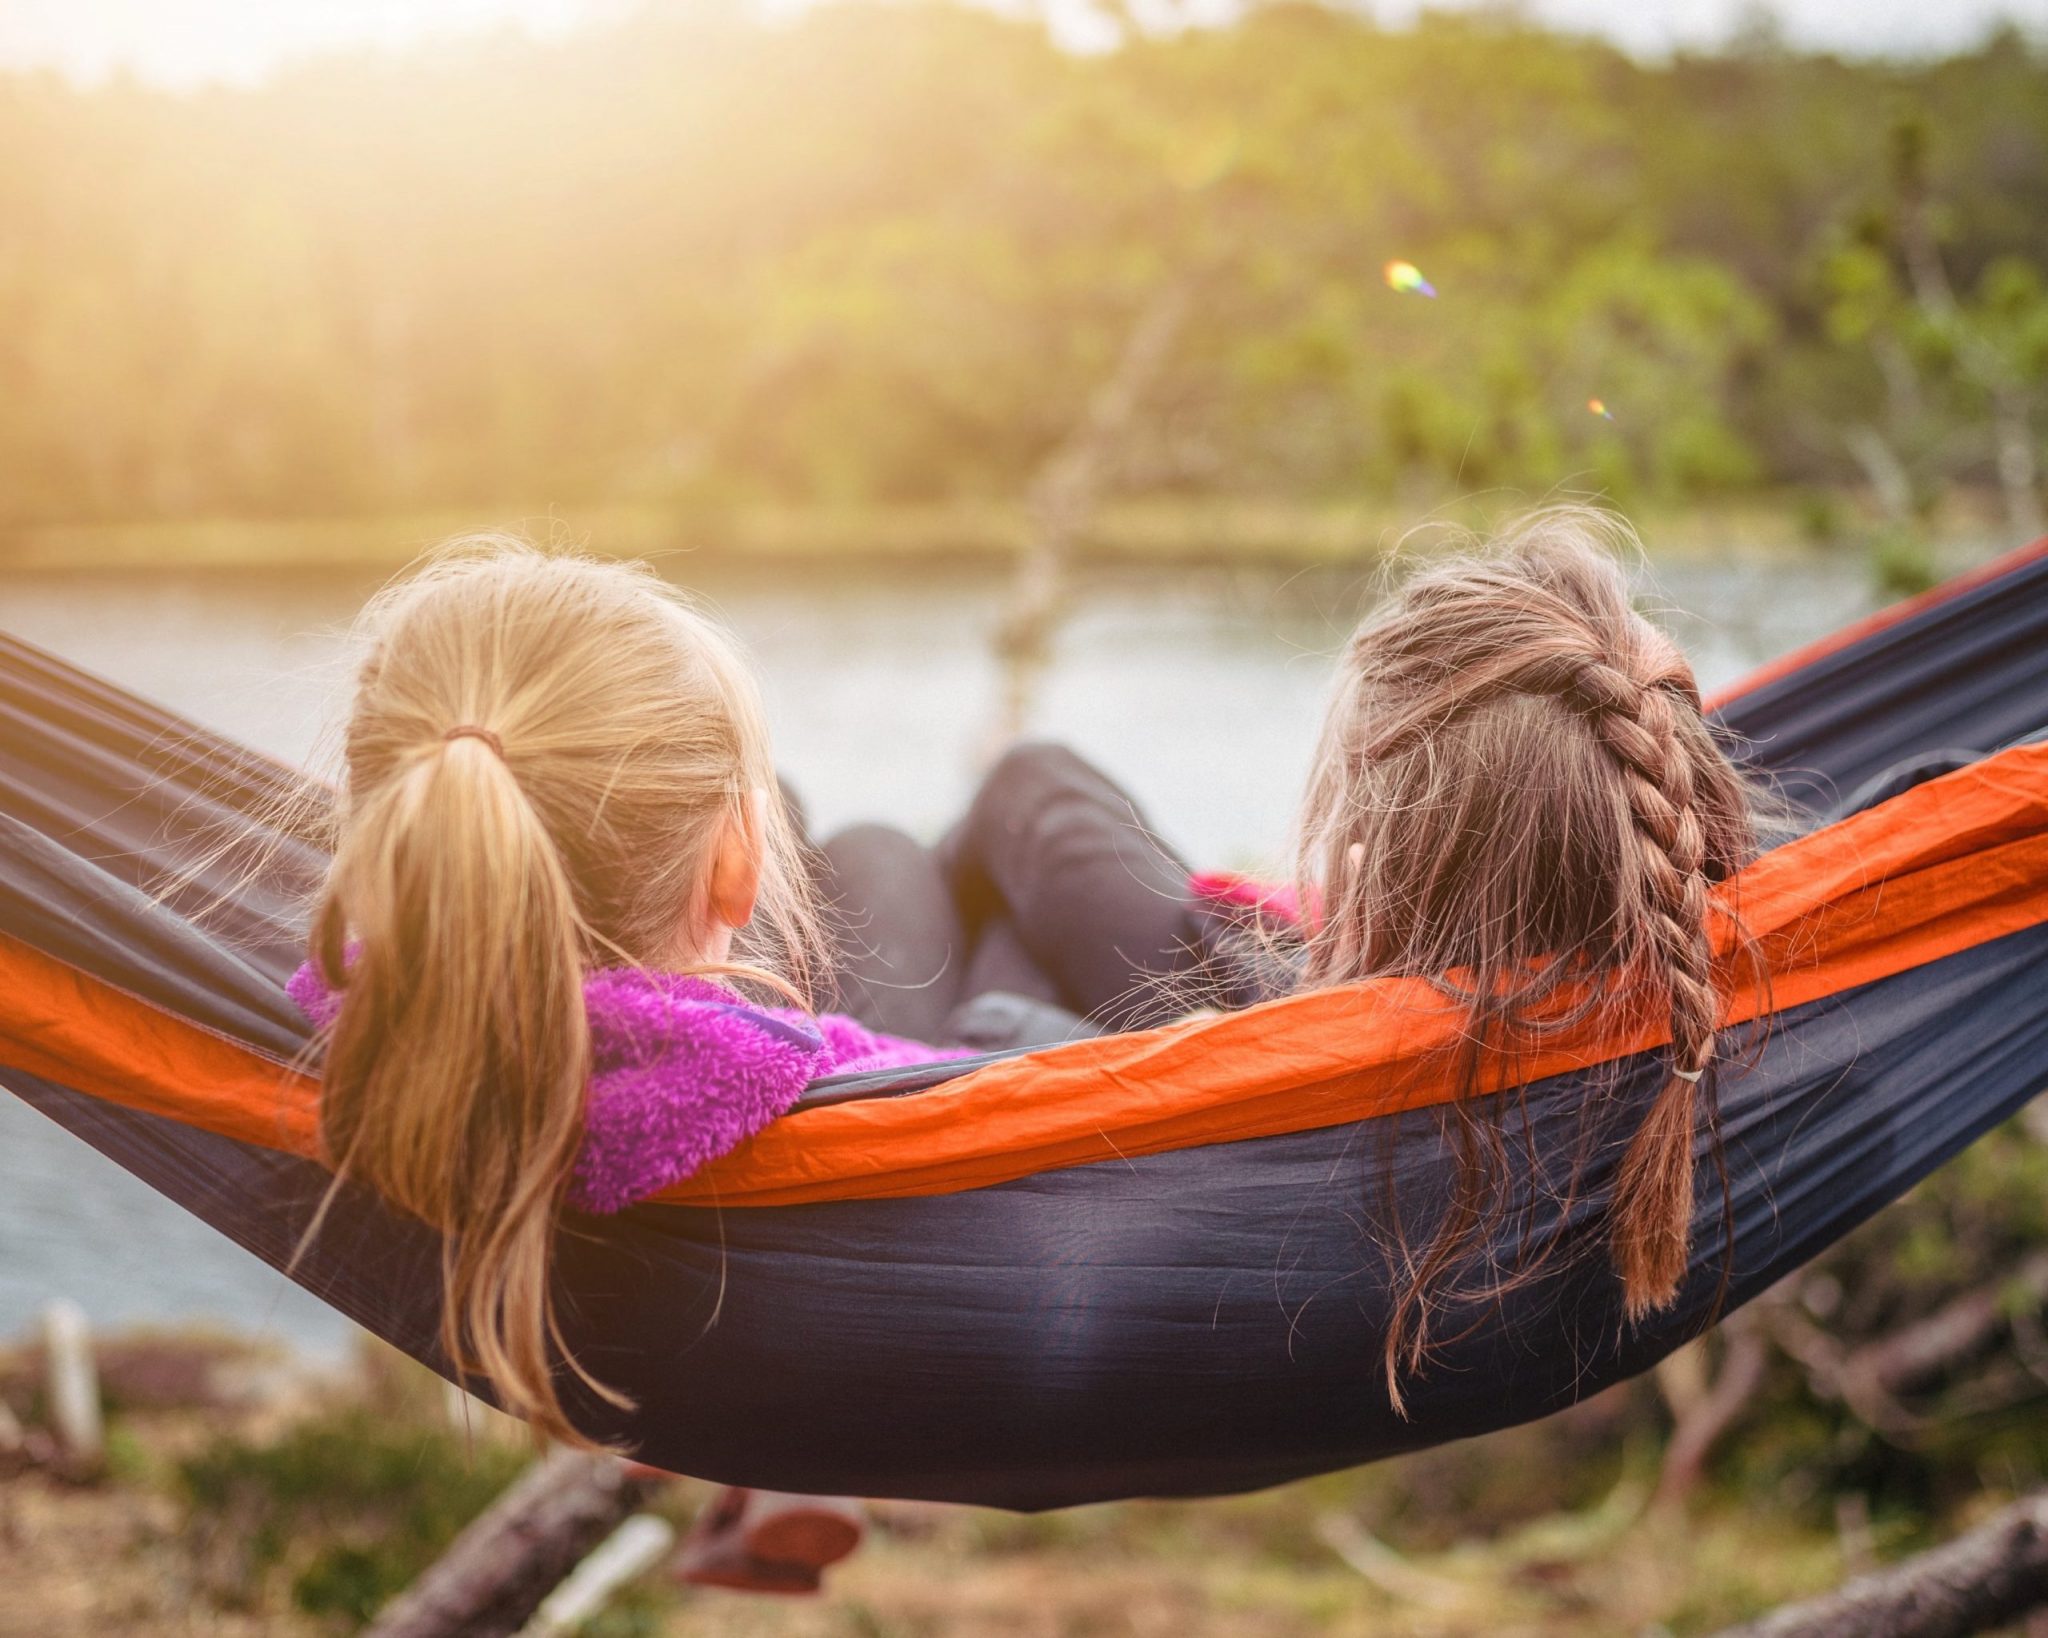 A hammock with two people with long hair sitting together